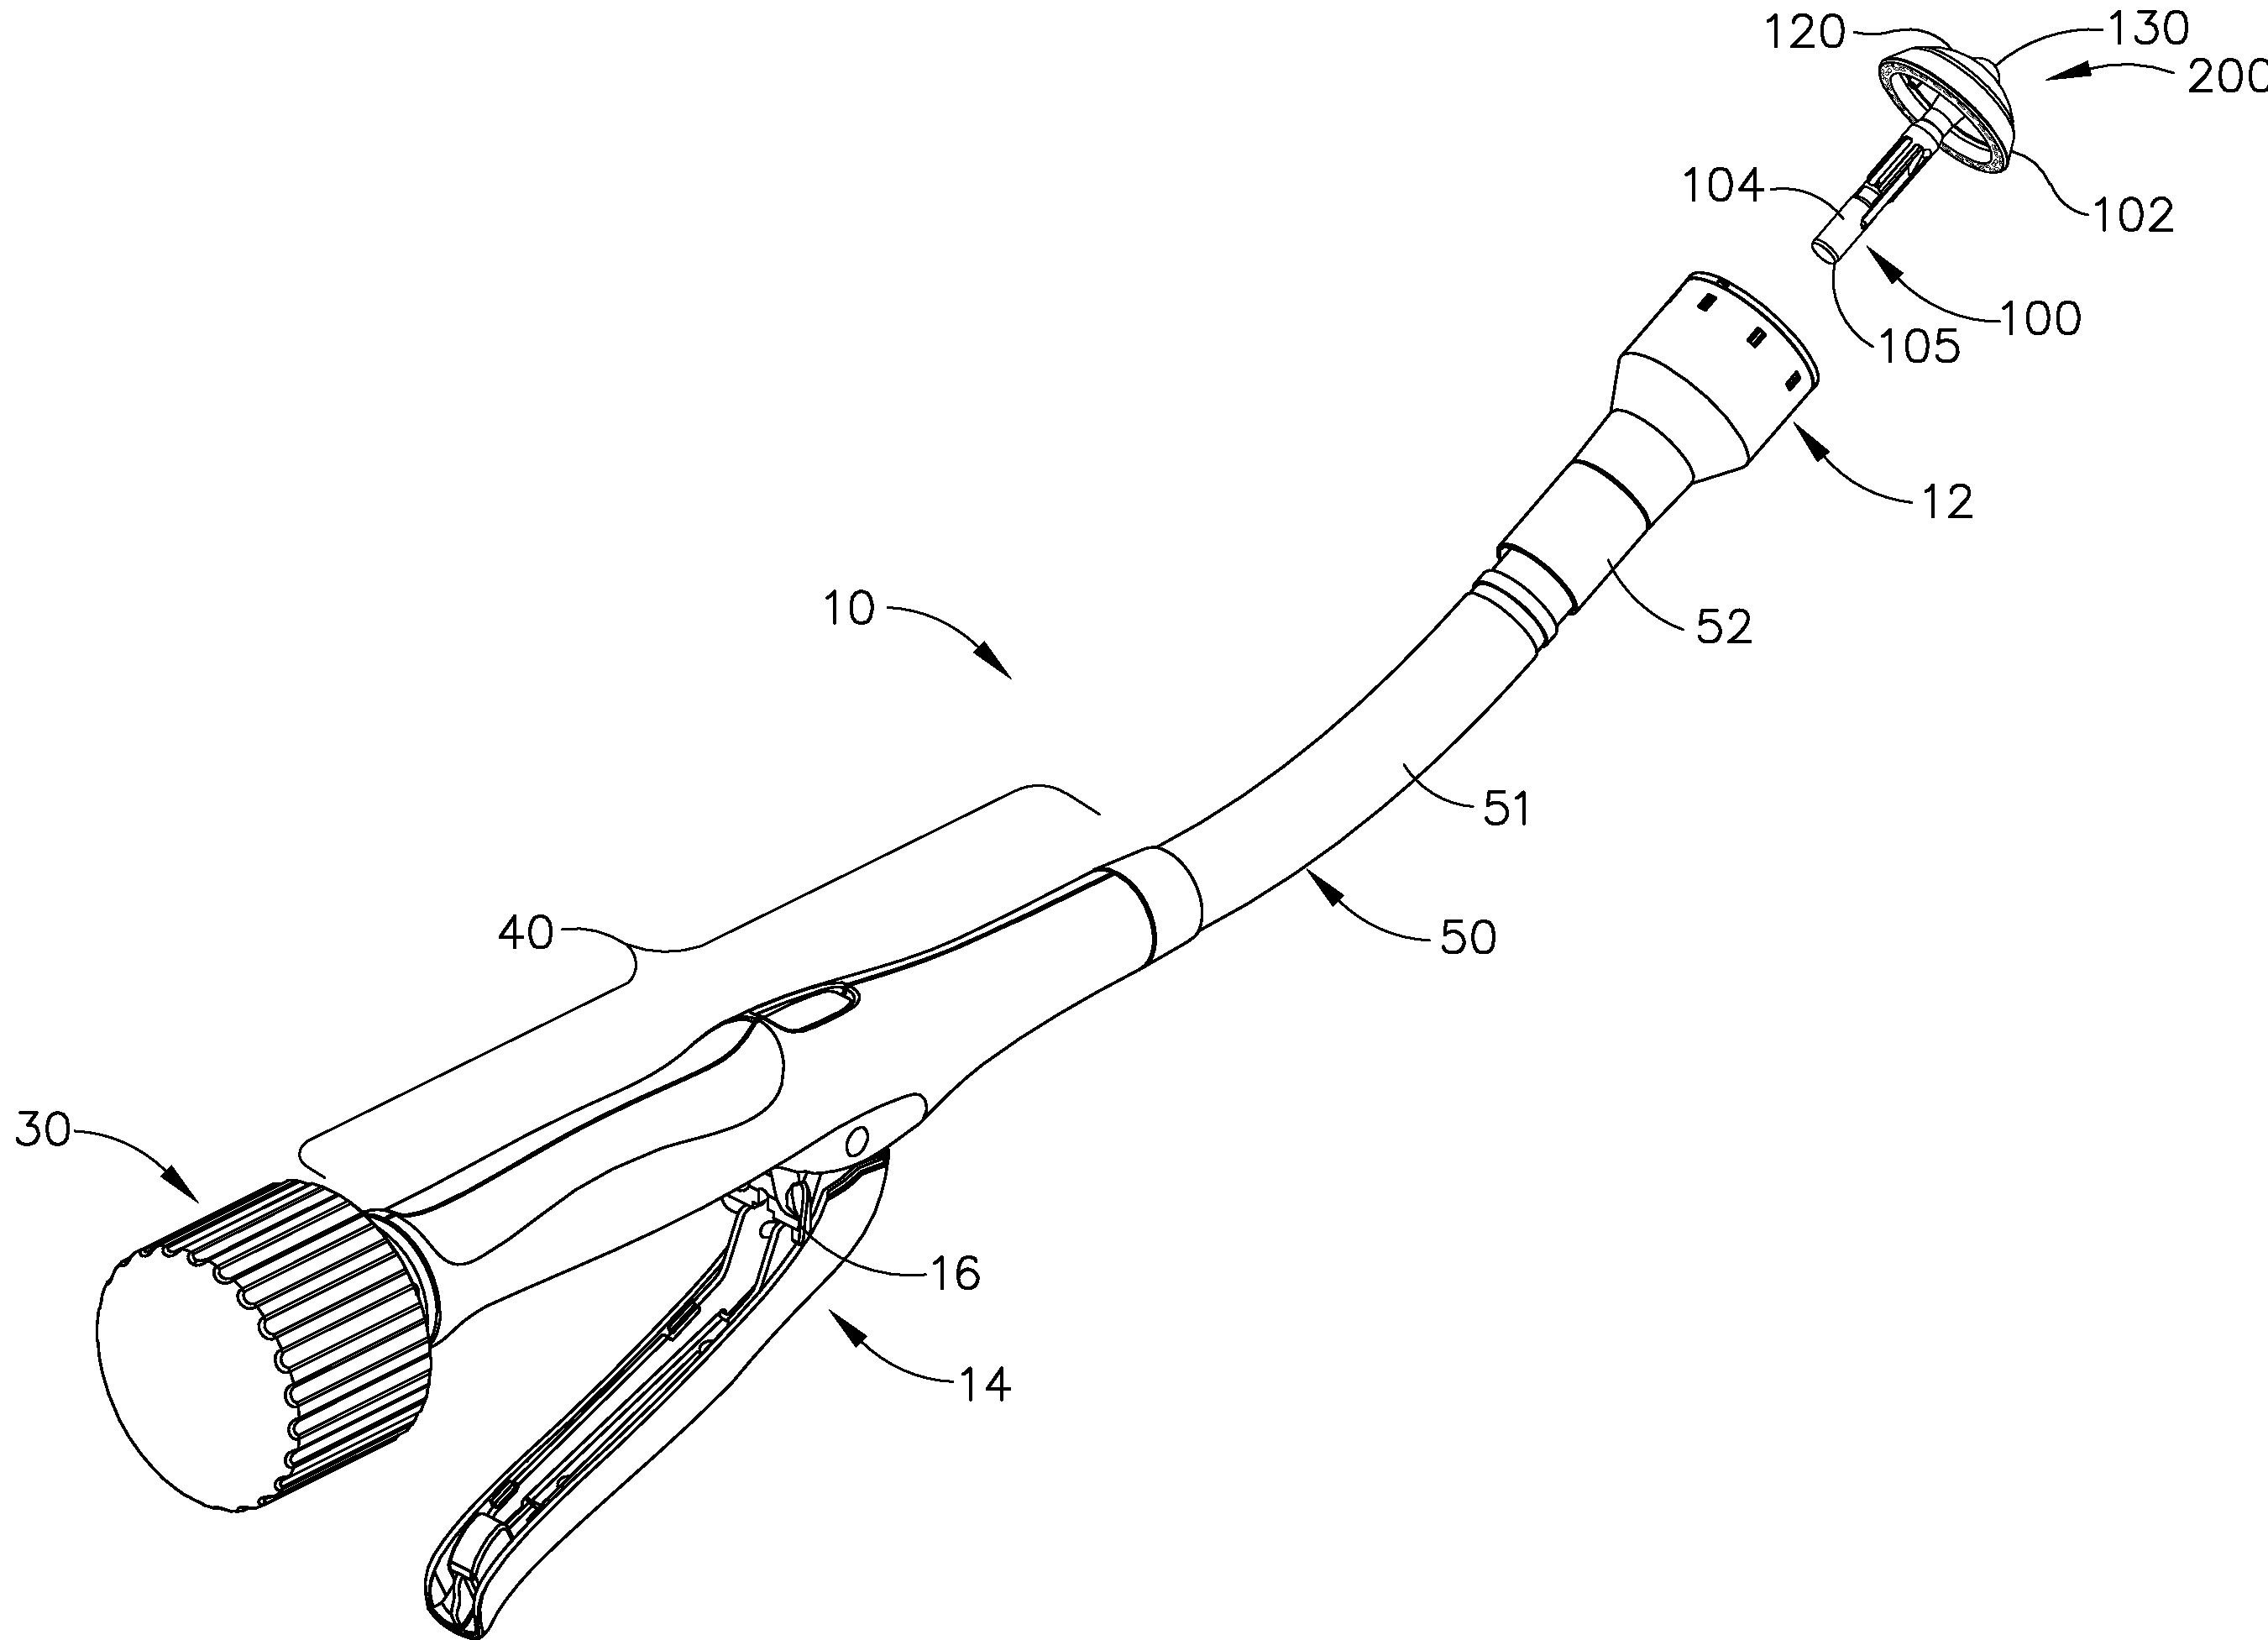 Surgical stapling instrument with apparatus for providing anvil position feedback